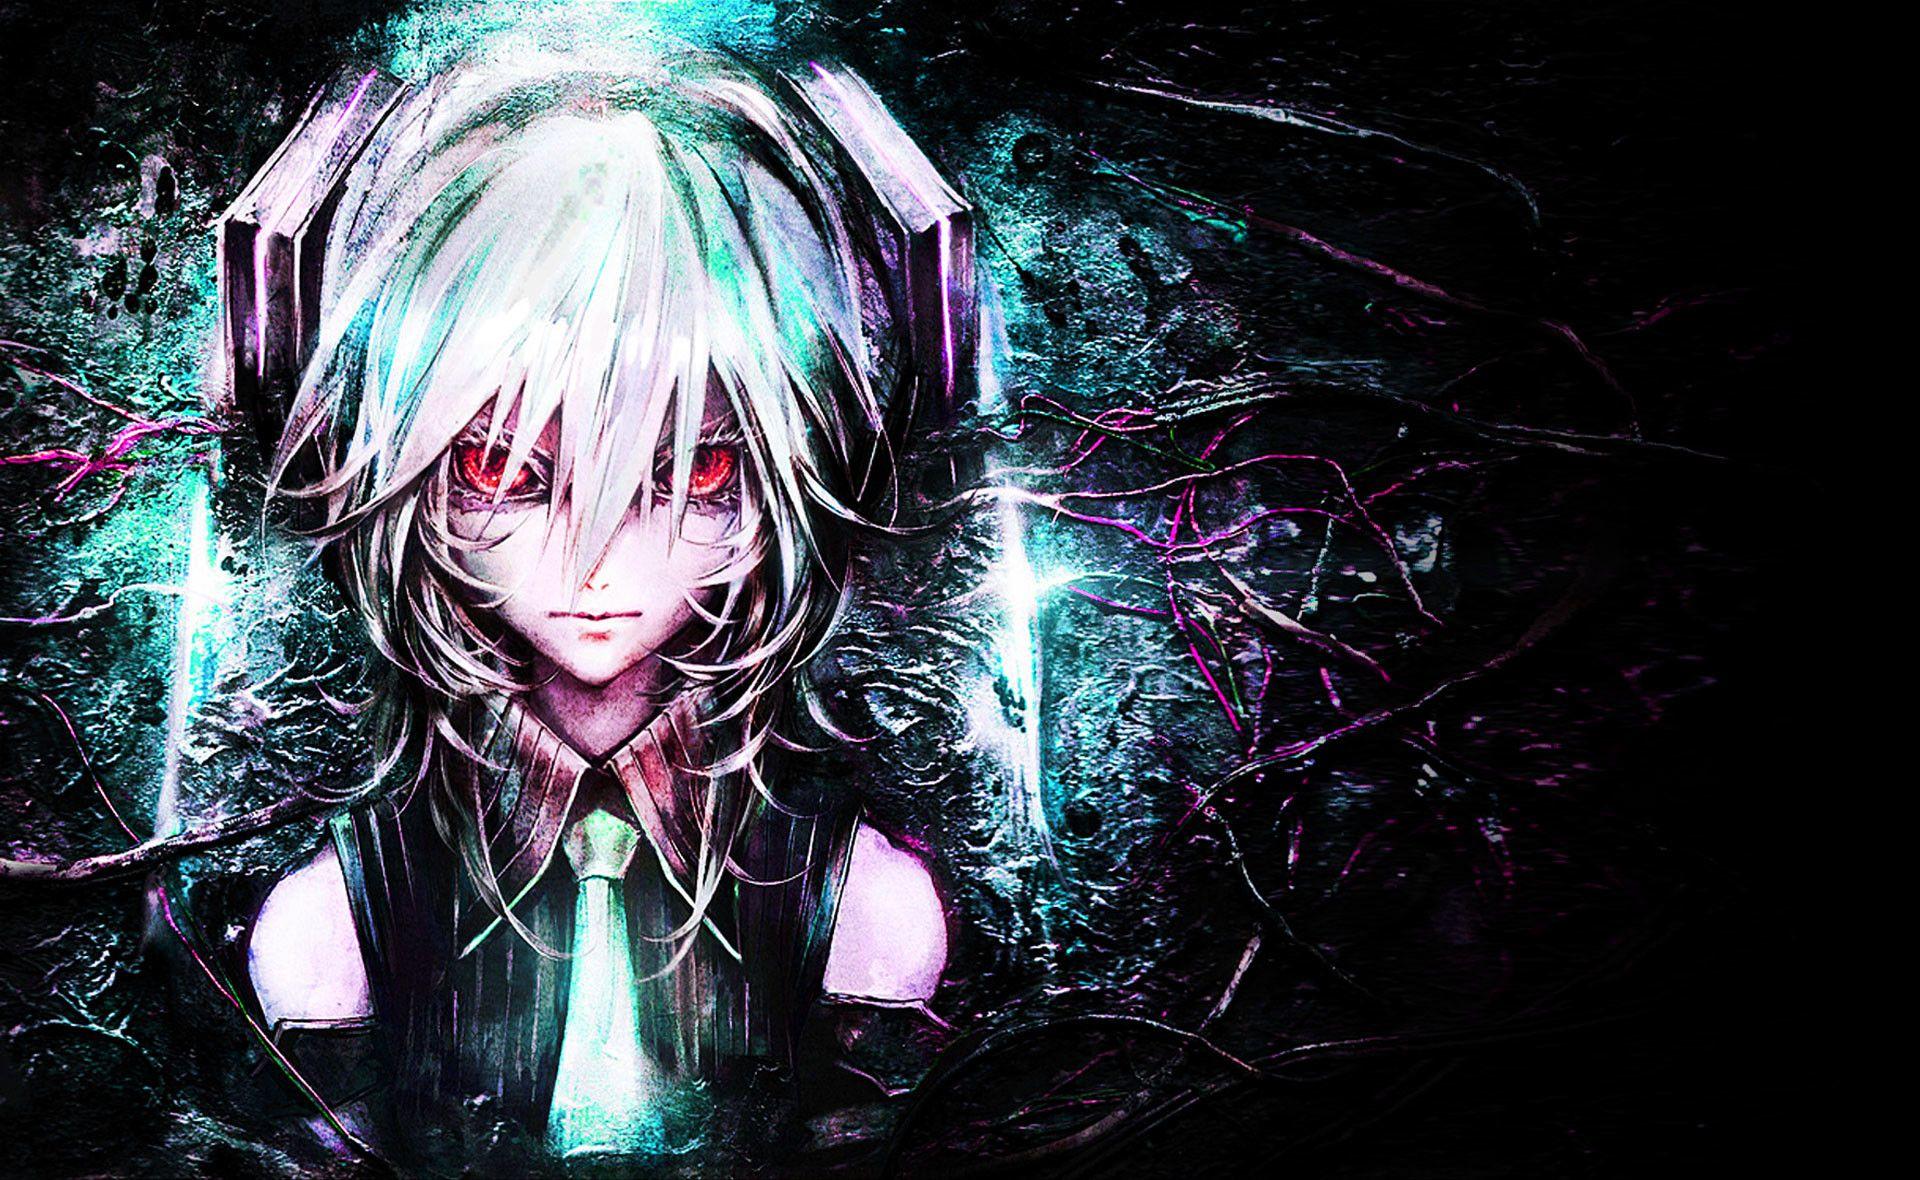 Download A dark anime boy deep in thought Wallpaper